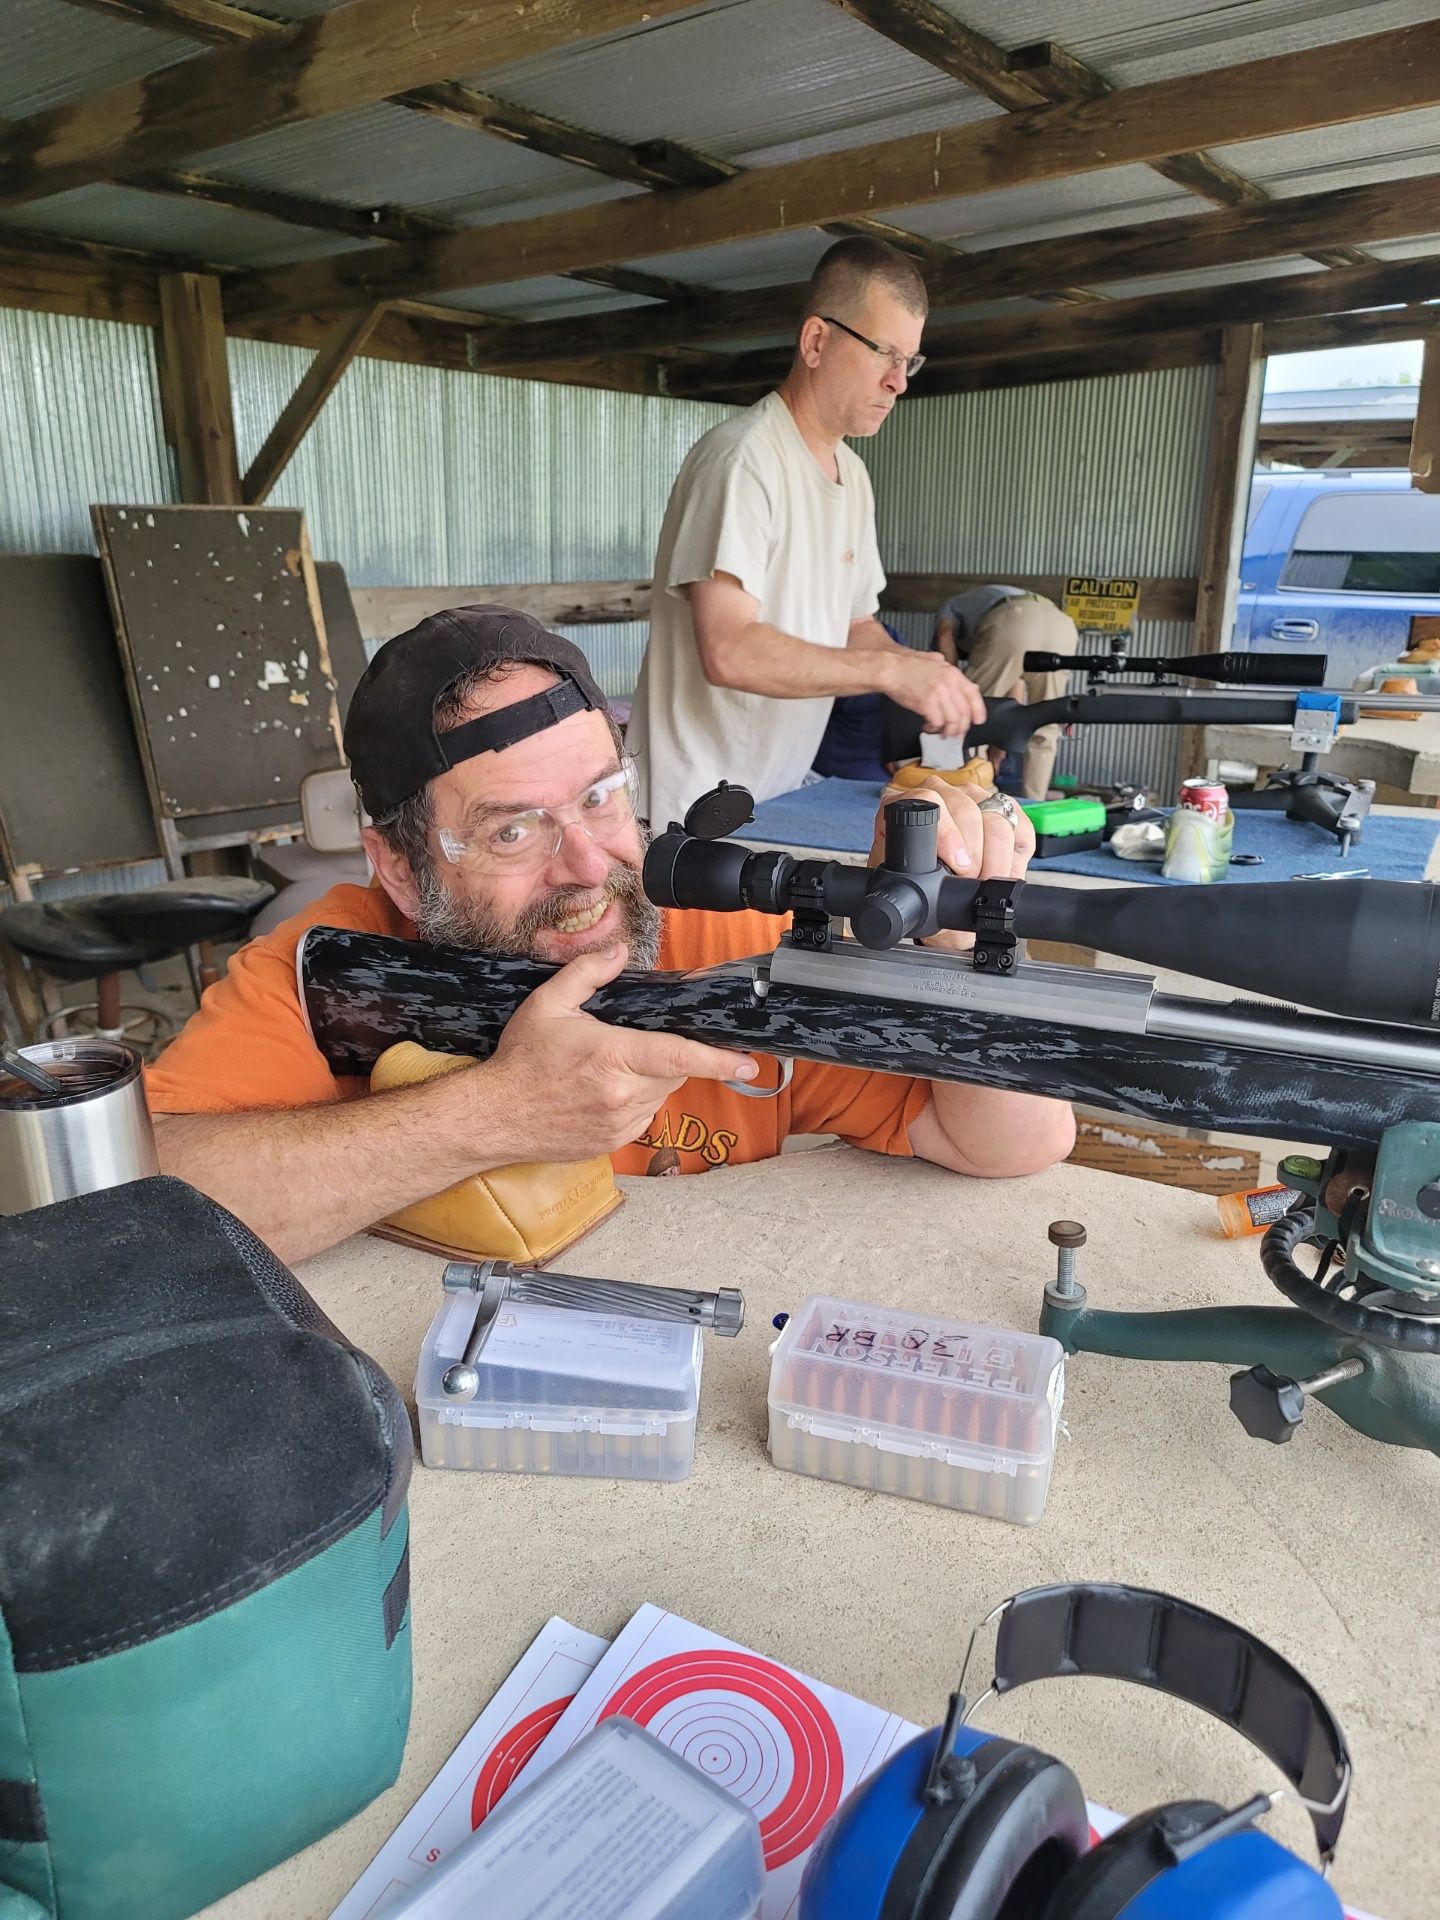 man with safety glasses smiling at camera while holding rifle at gun range table